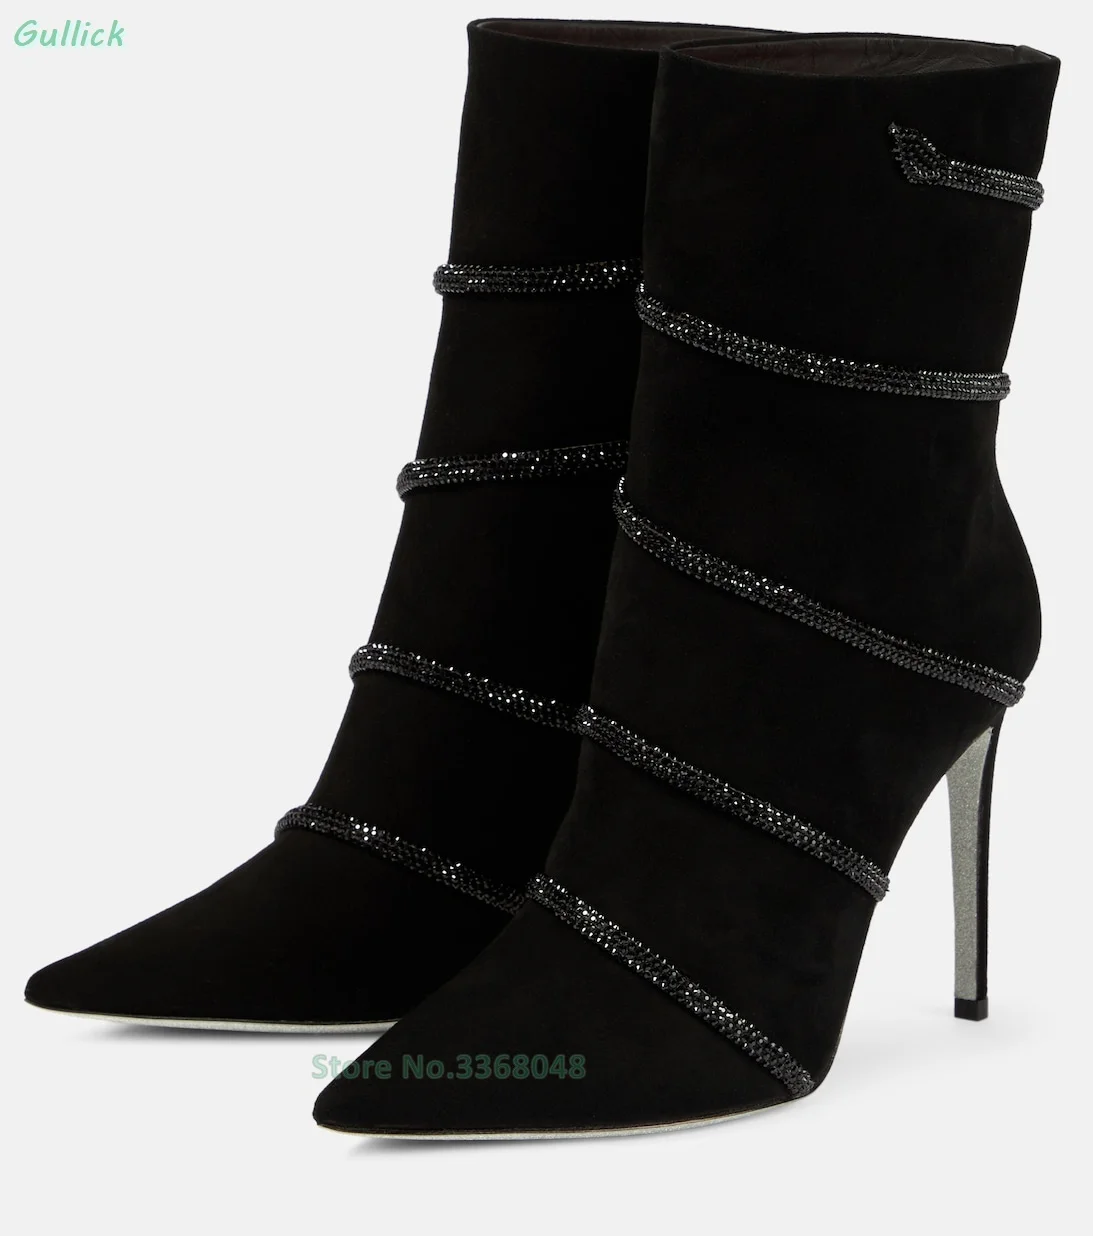 

Crystal-embellished Snake Straps Ankle Booties Sexy Pointed Toe Black Suede Winter Autumn Women Boots Thin High Heel Shoes